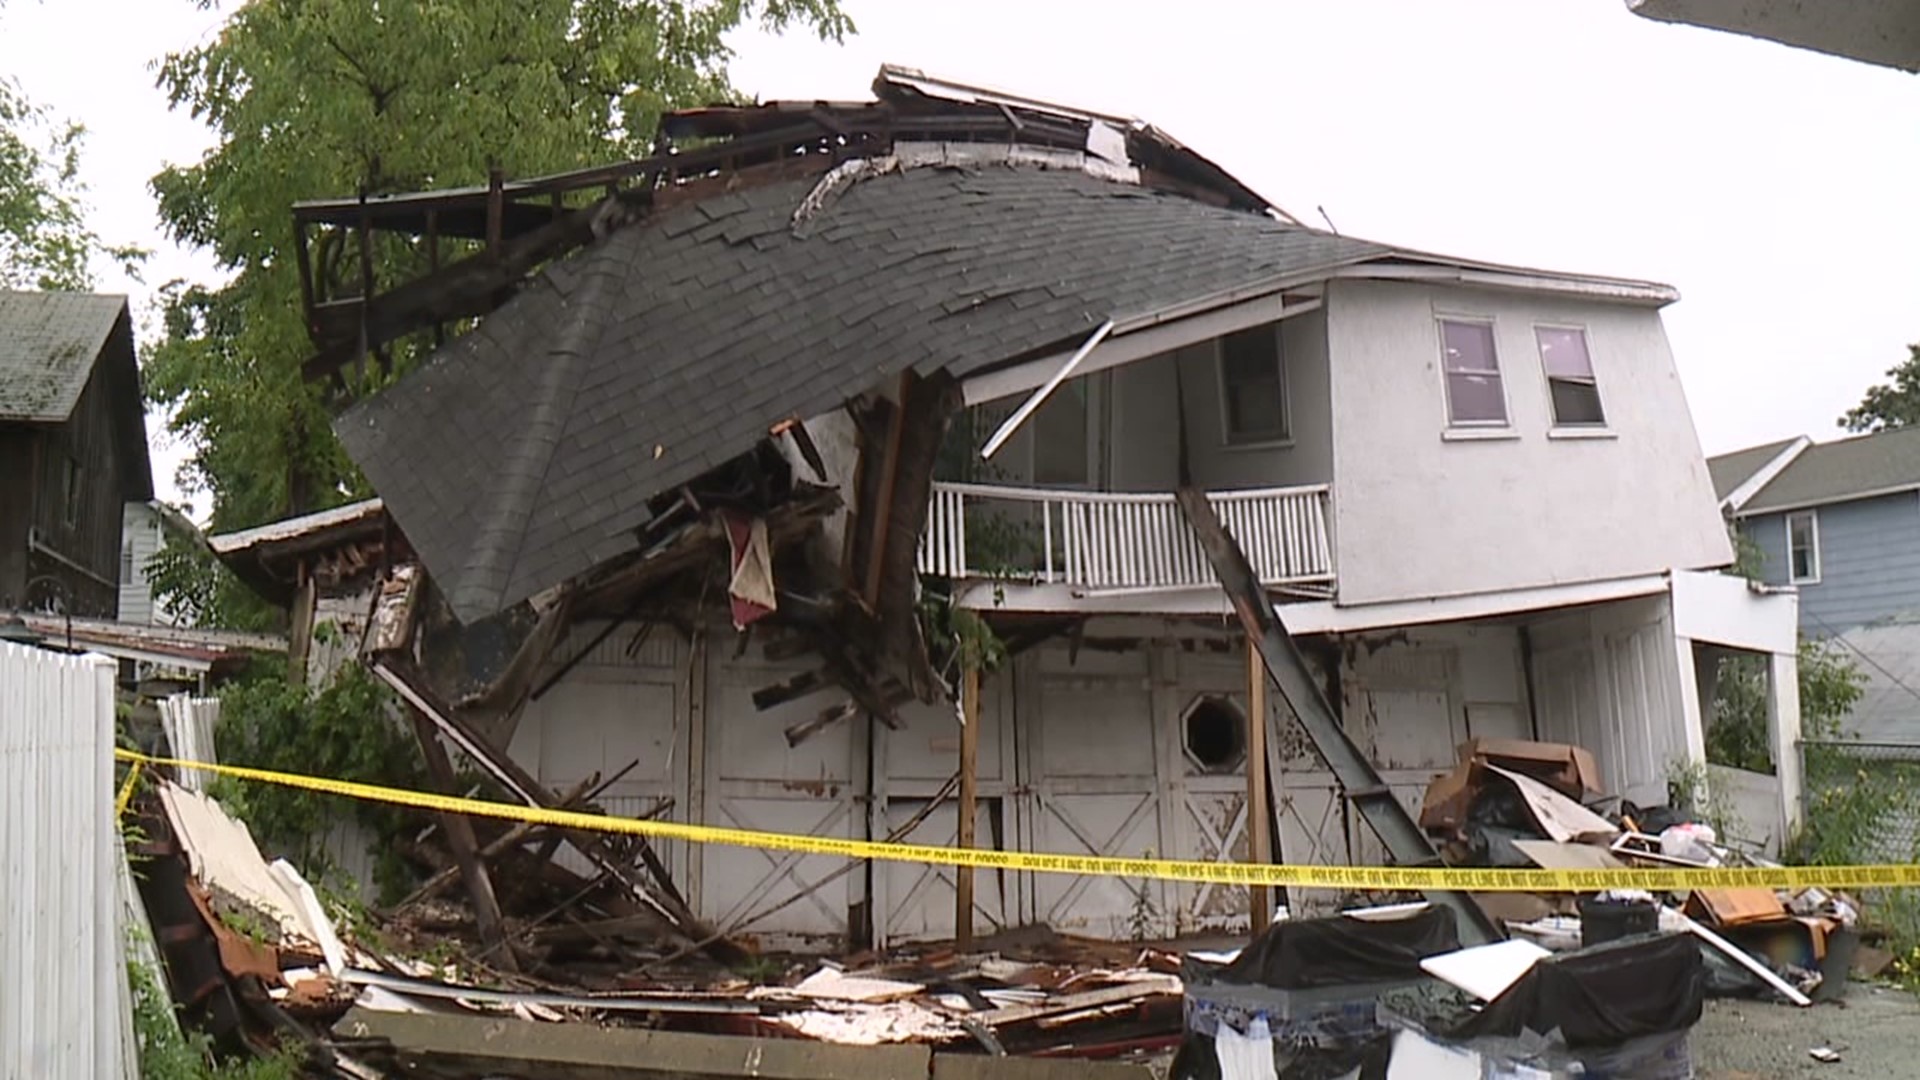 The house on Deacon Street came down on Monday during heavy rain.